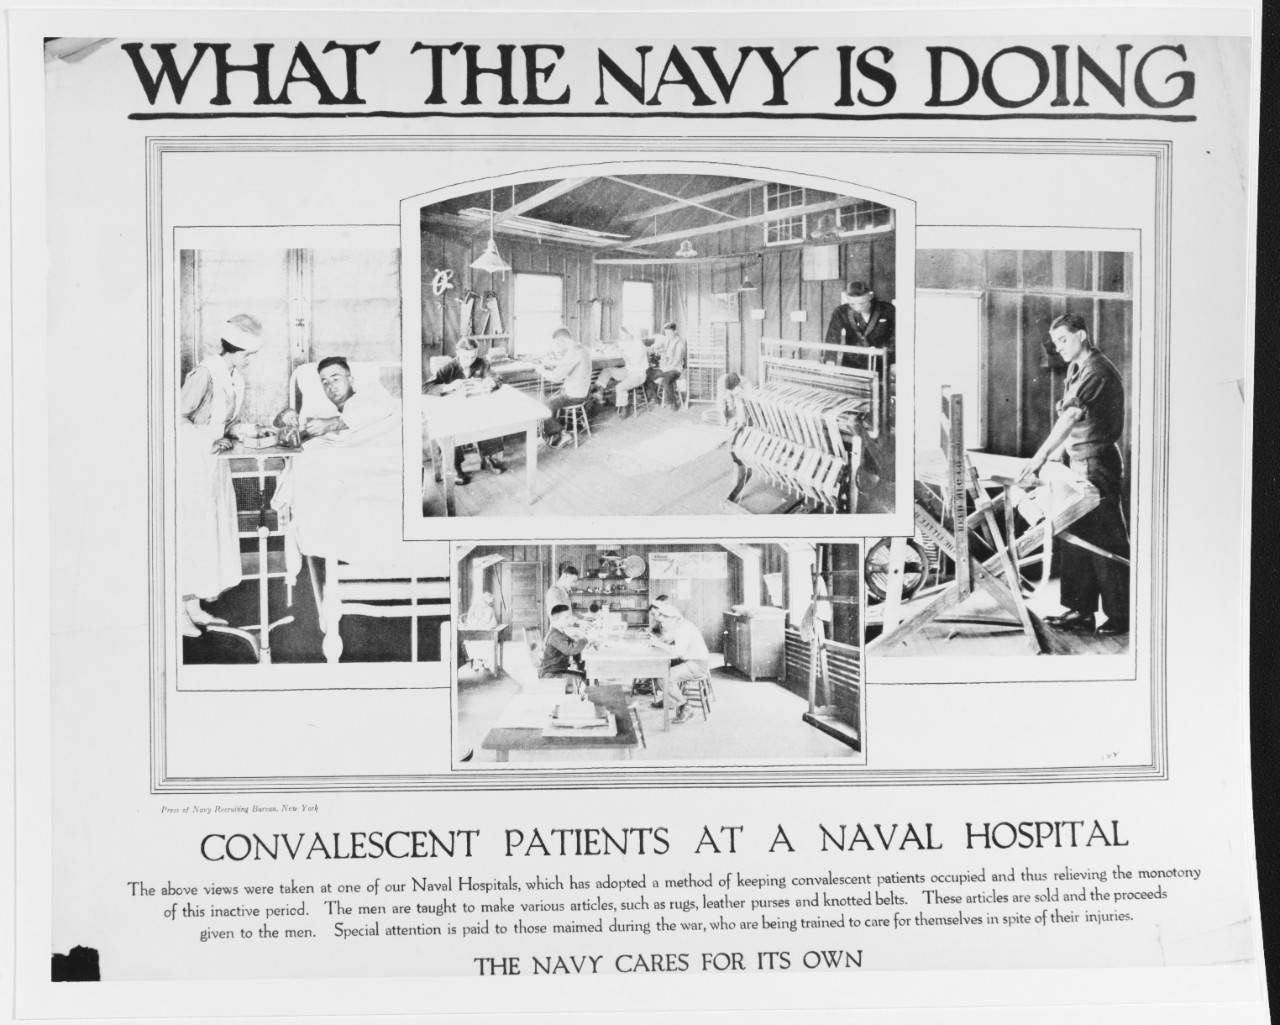 Recruiting Poster: What the Navy is Doing: Convalescent Patients at a Naval Hospital